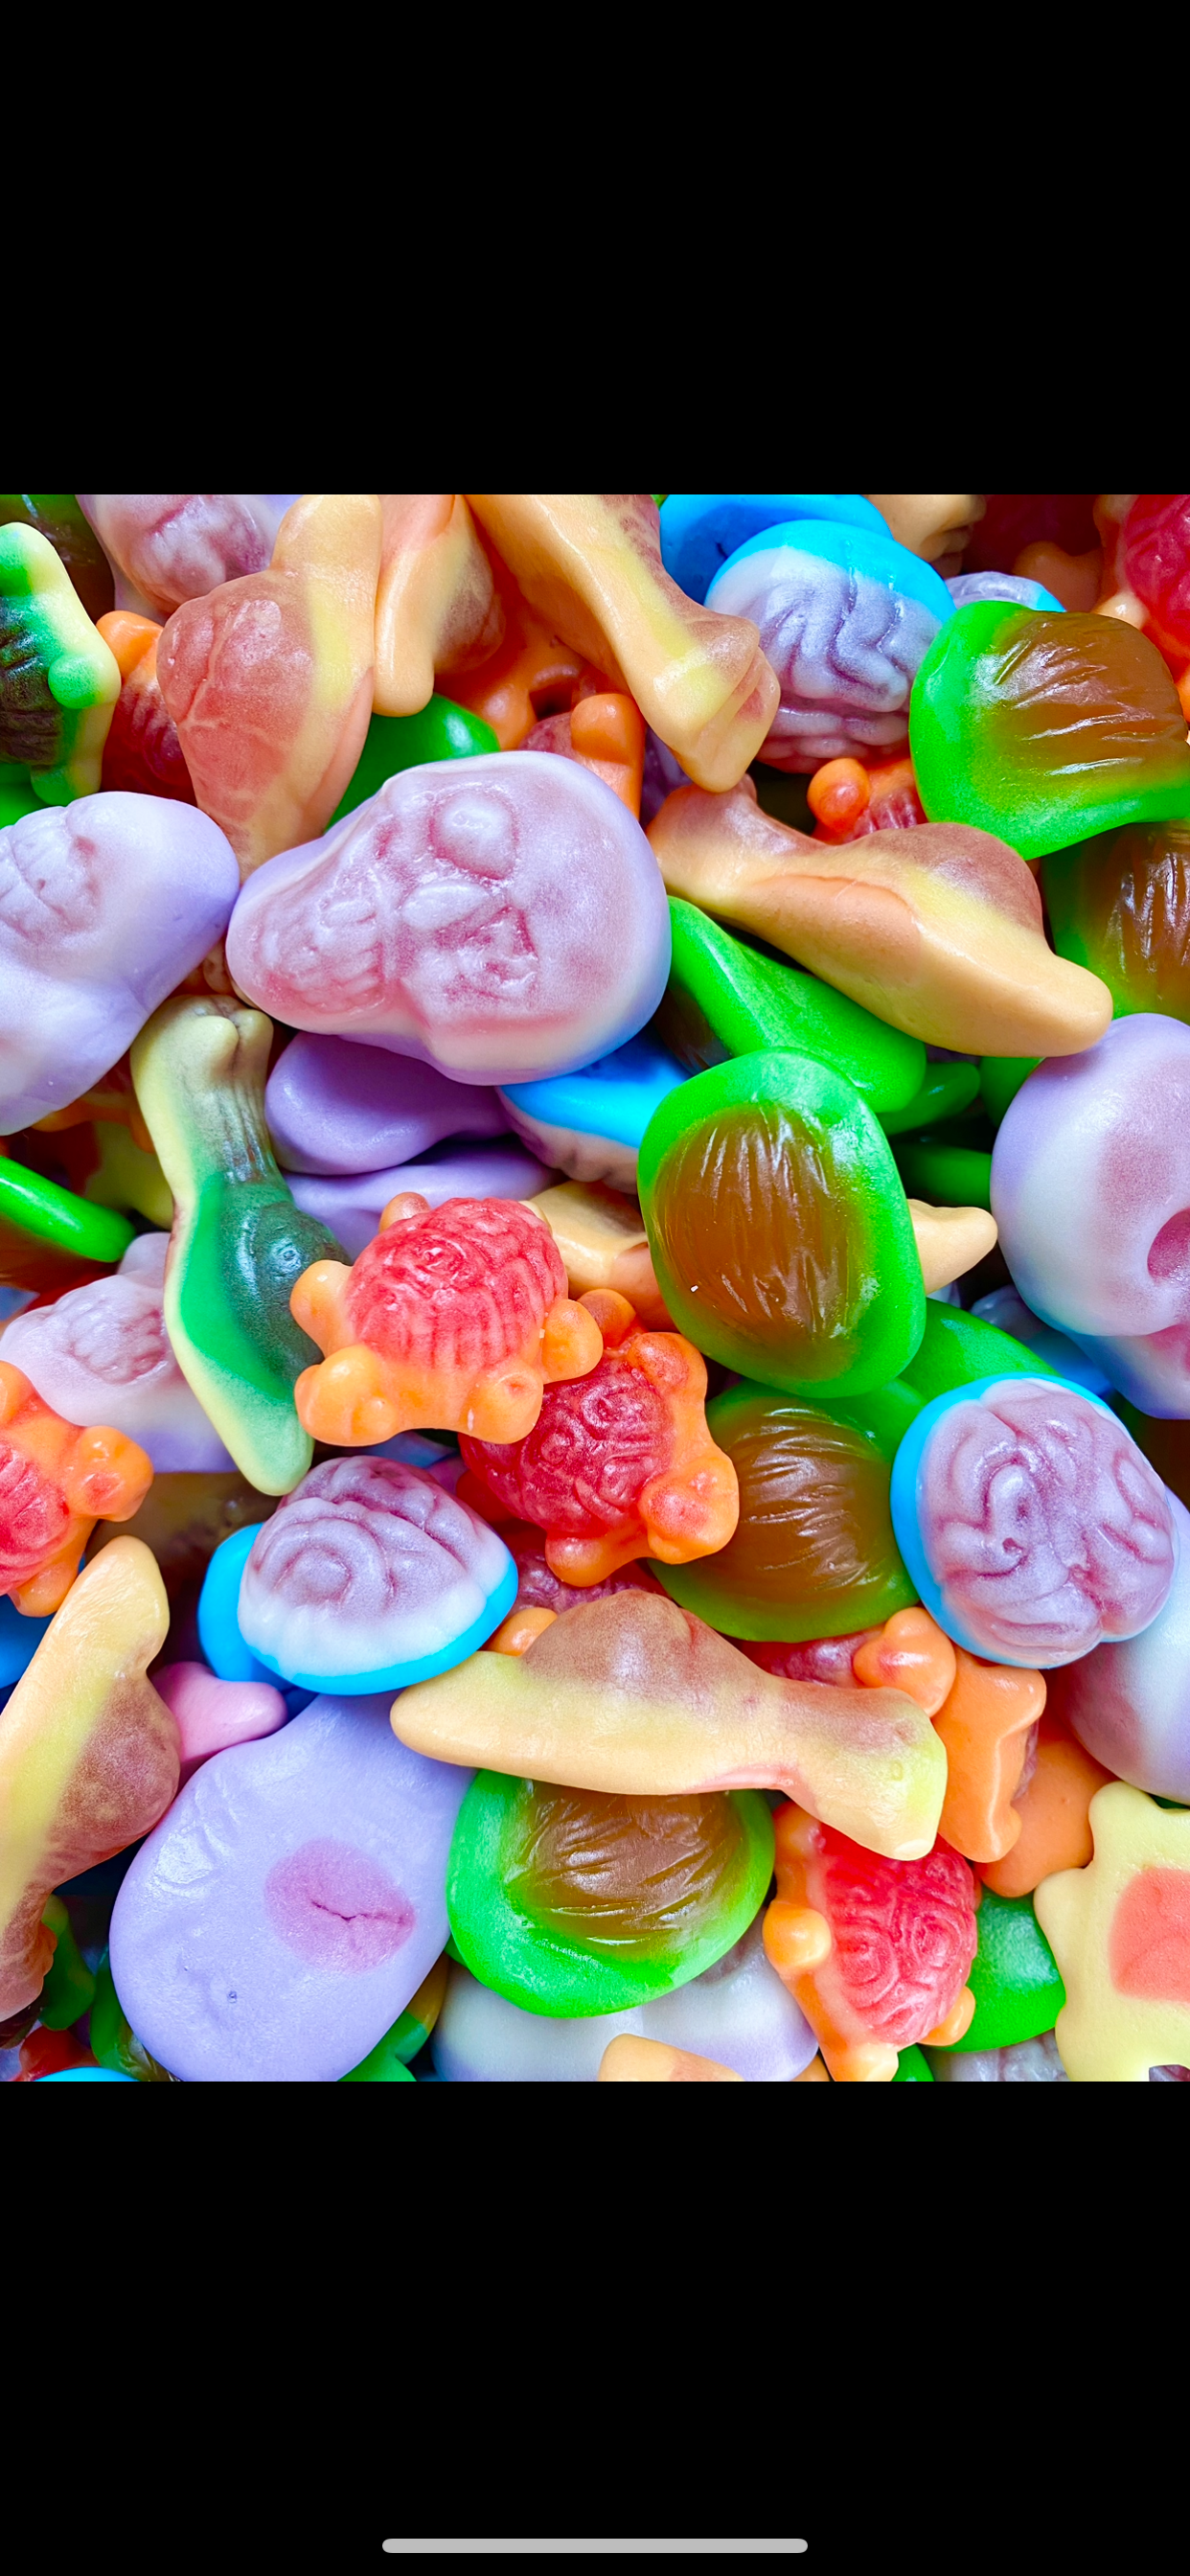 iCandyUK 1KG Jelly Filled Sweets Mix!